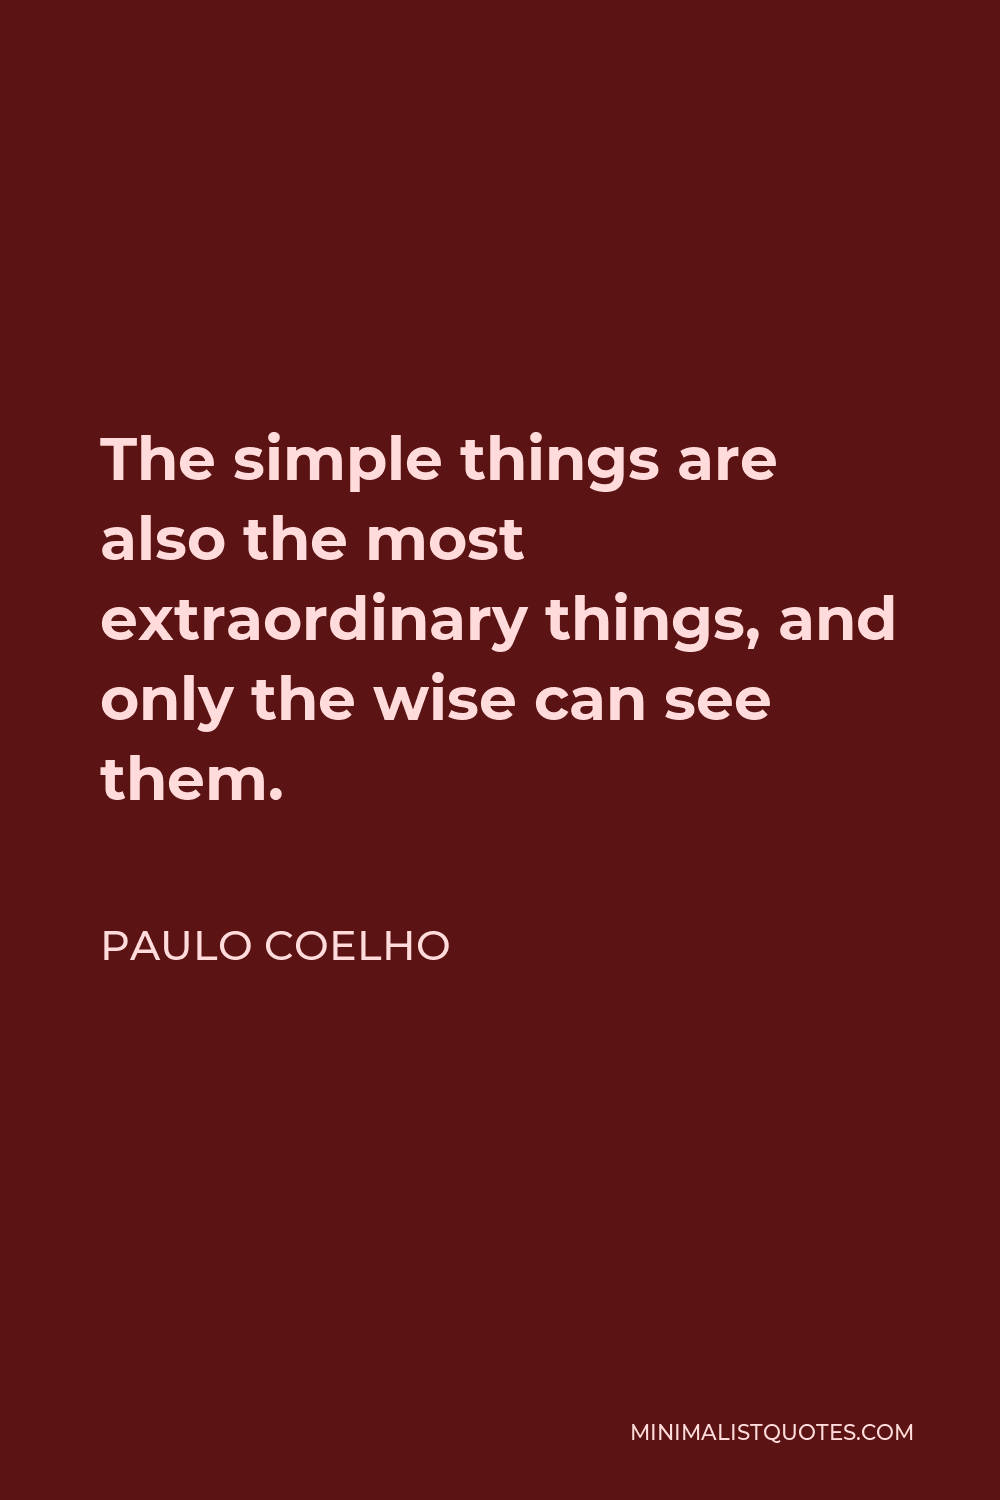 Paulo Coelho Quote - The simple things are also the most extraordinary things, and only the wise can see them.